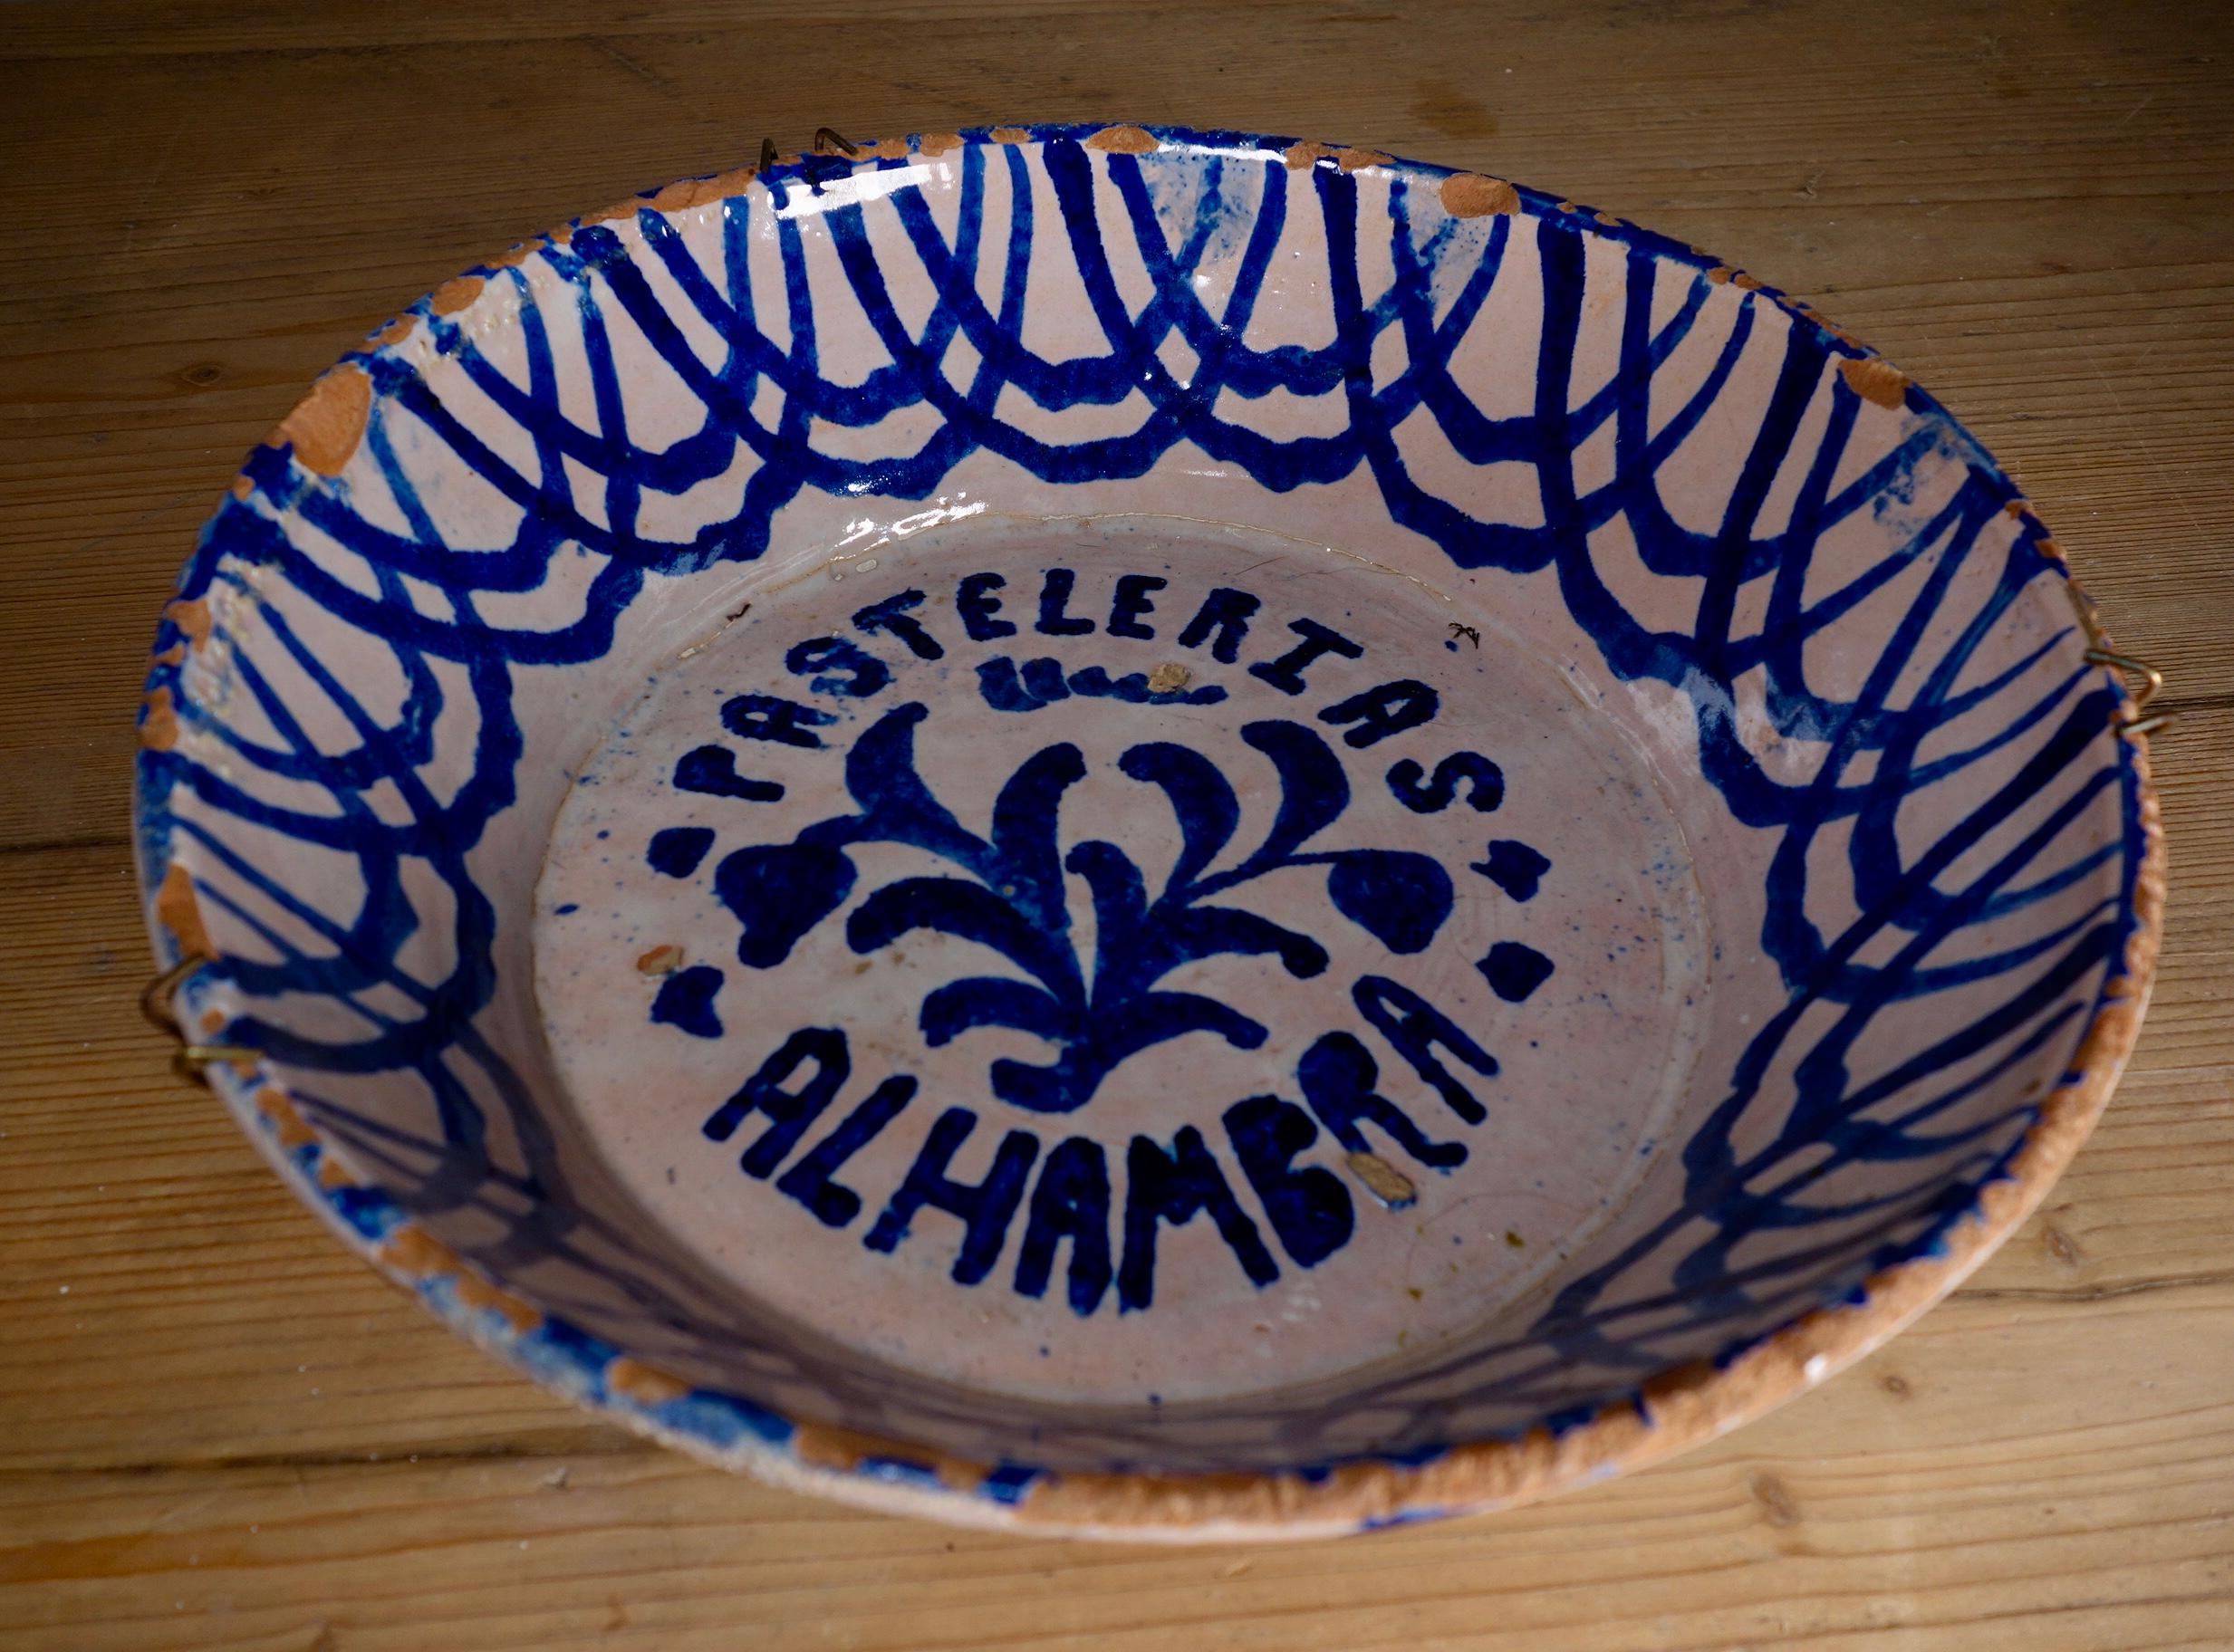 A 19th century Spanish bowl originating from Granada. This bowl has been decorated with blue hand painted decorations featuring 'Pastelerias Alhambra' written on the bottom of the bowl finished with overlapping semi-circular designs to the rim. 
